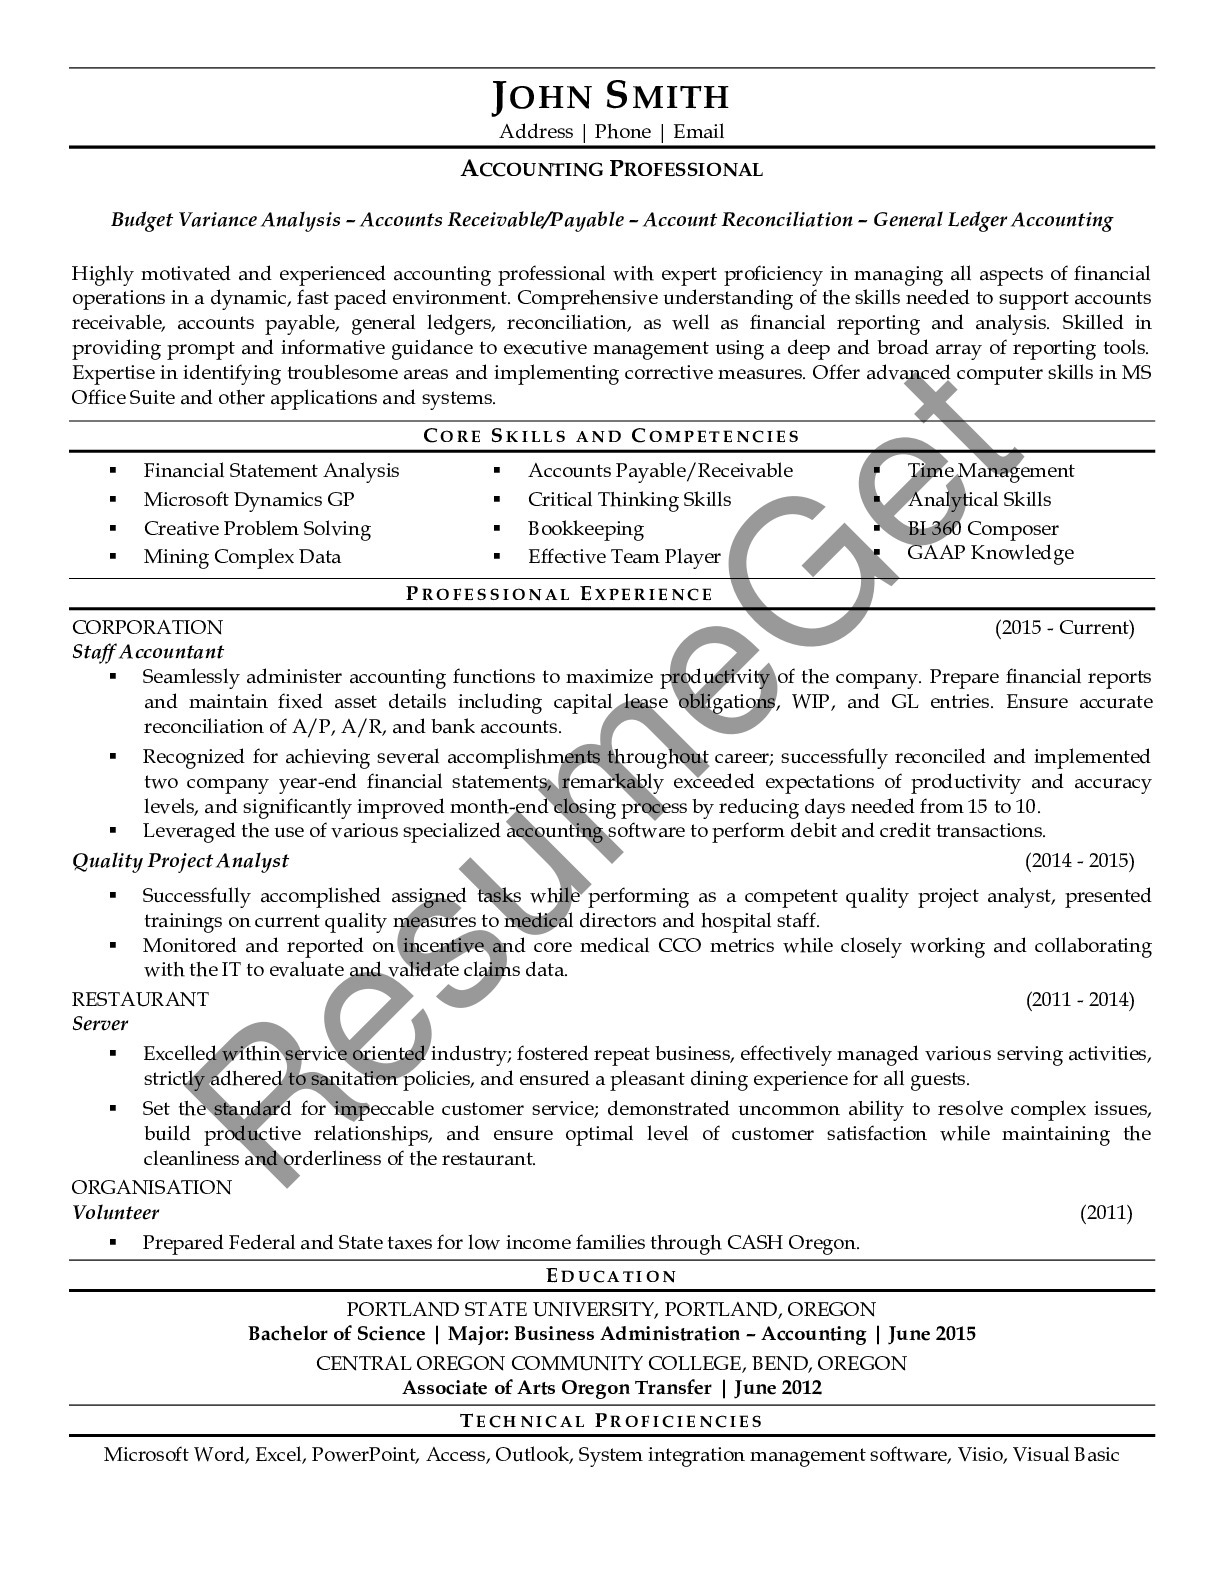 Accountant Resume Example & Sample | ResumeGets.com